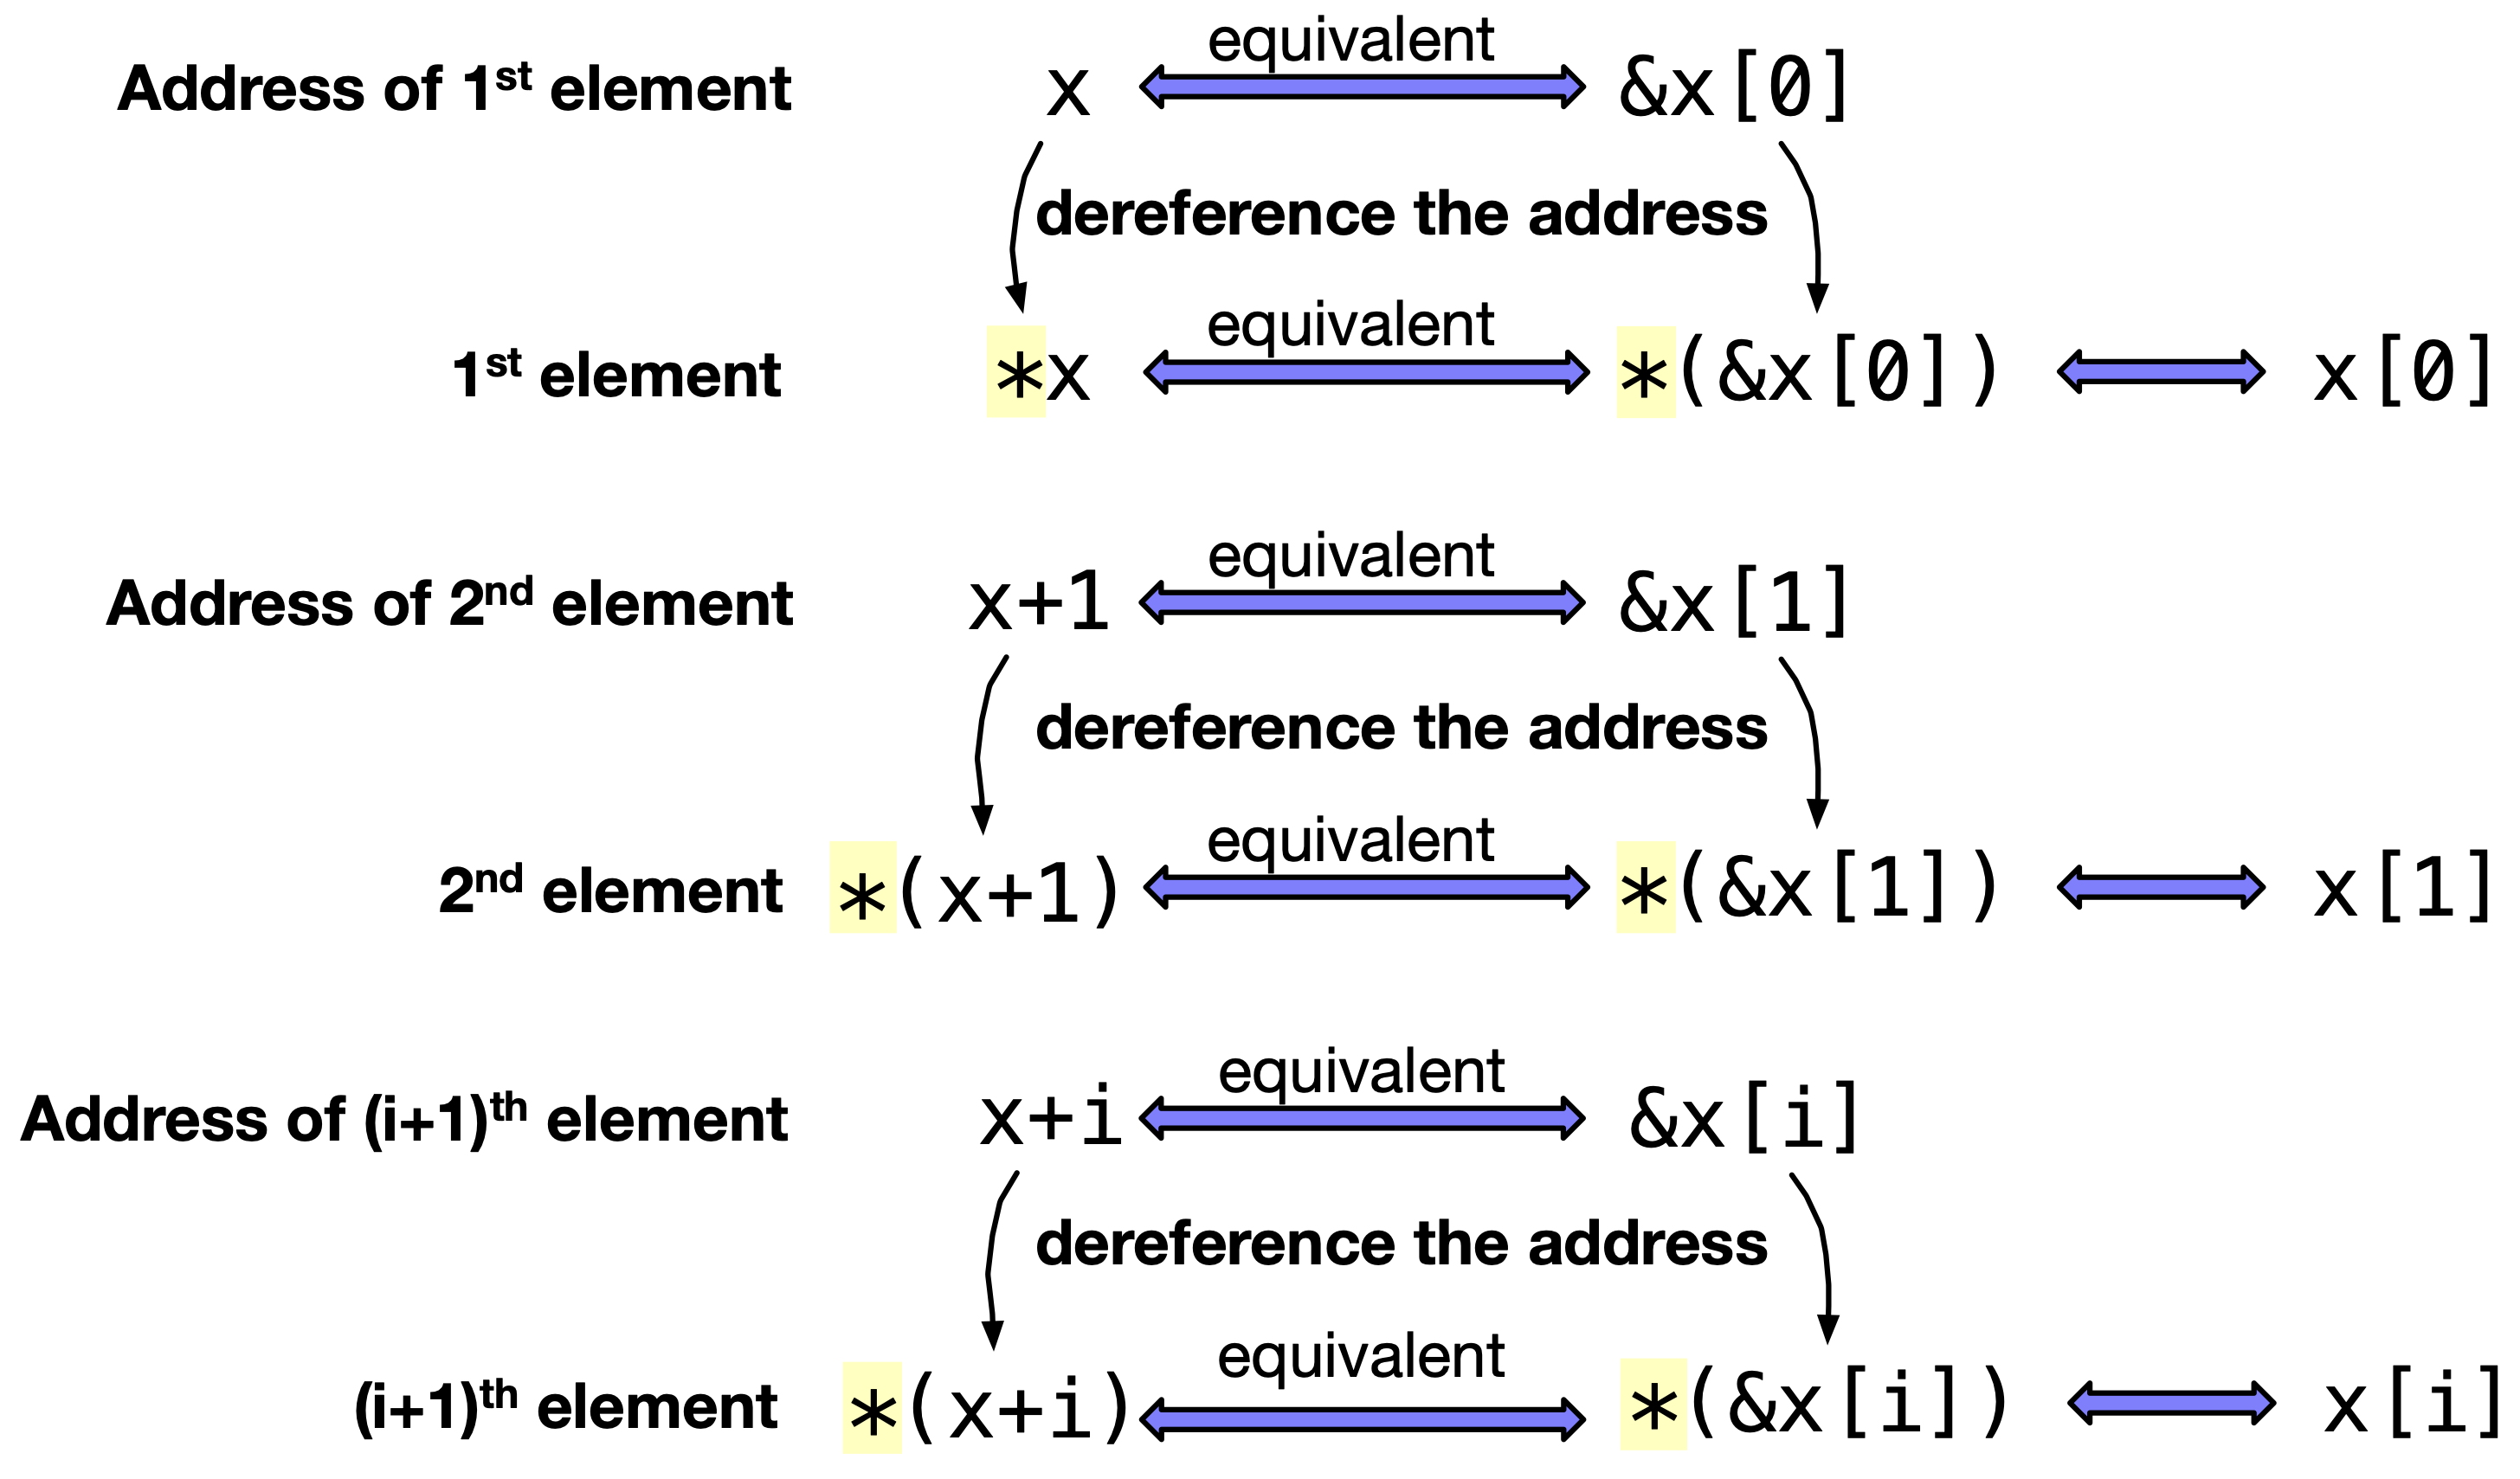 How can we use x to point to elements in the array and access them?